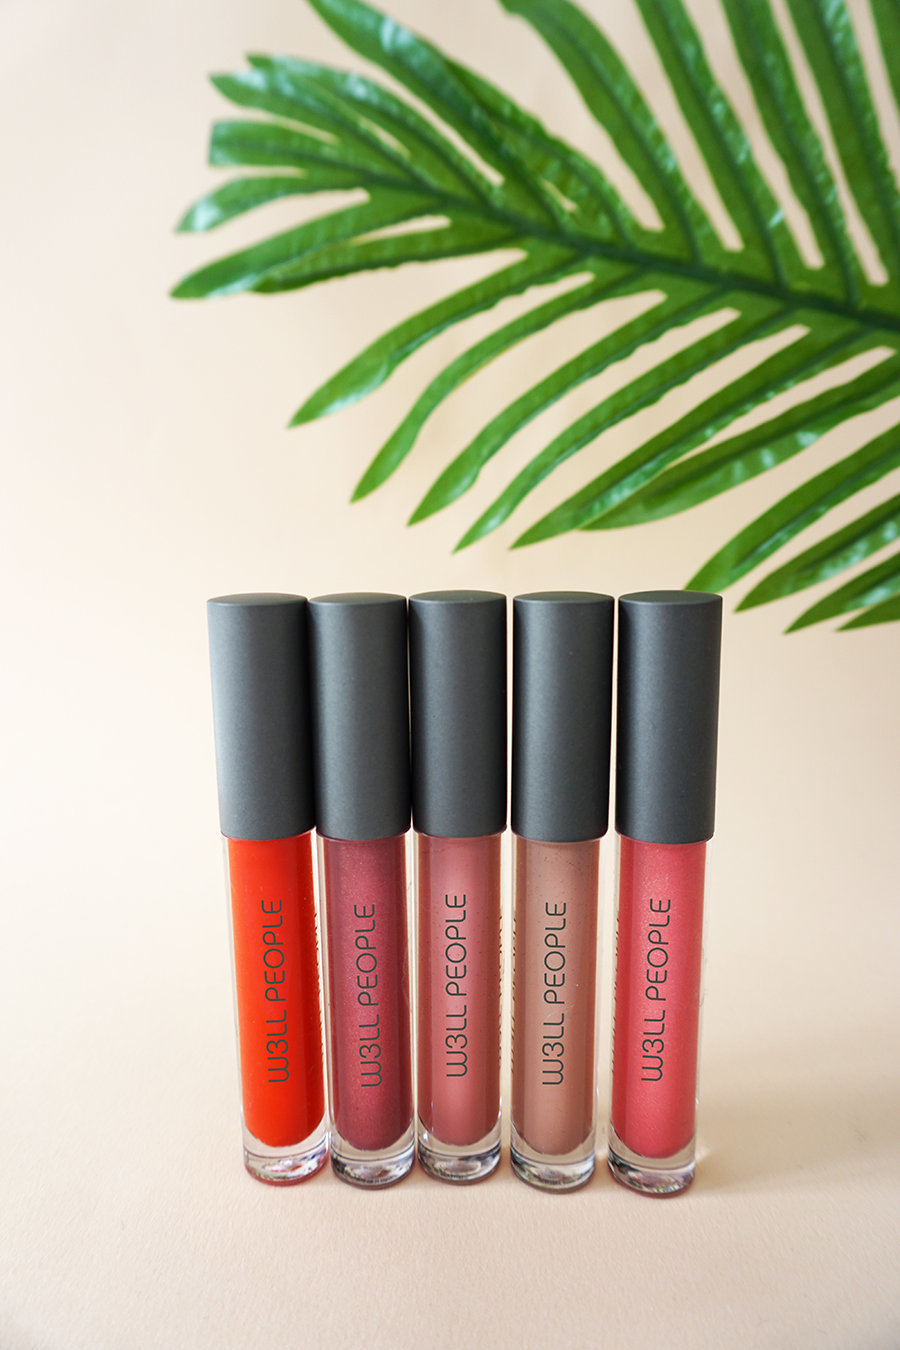 Bio Extreme Lipglosses on peach with plant